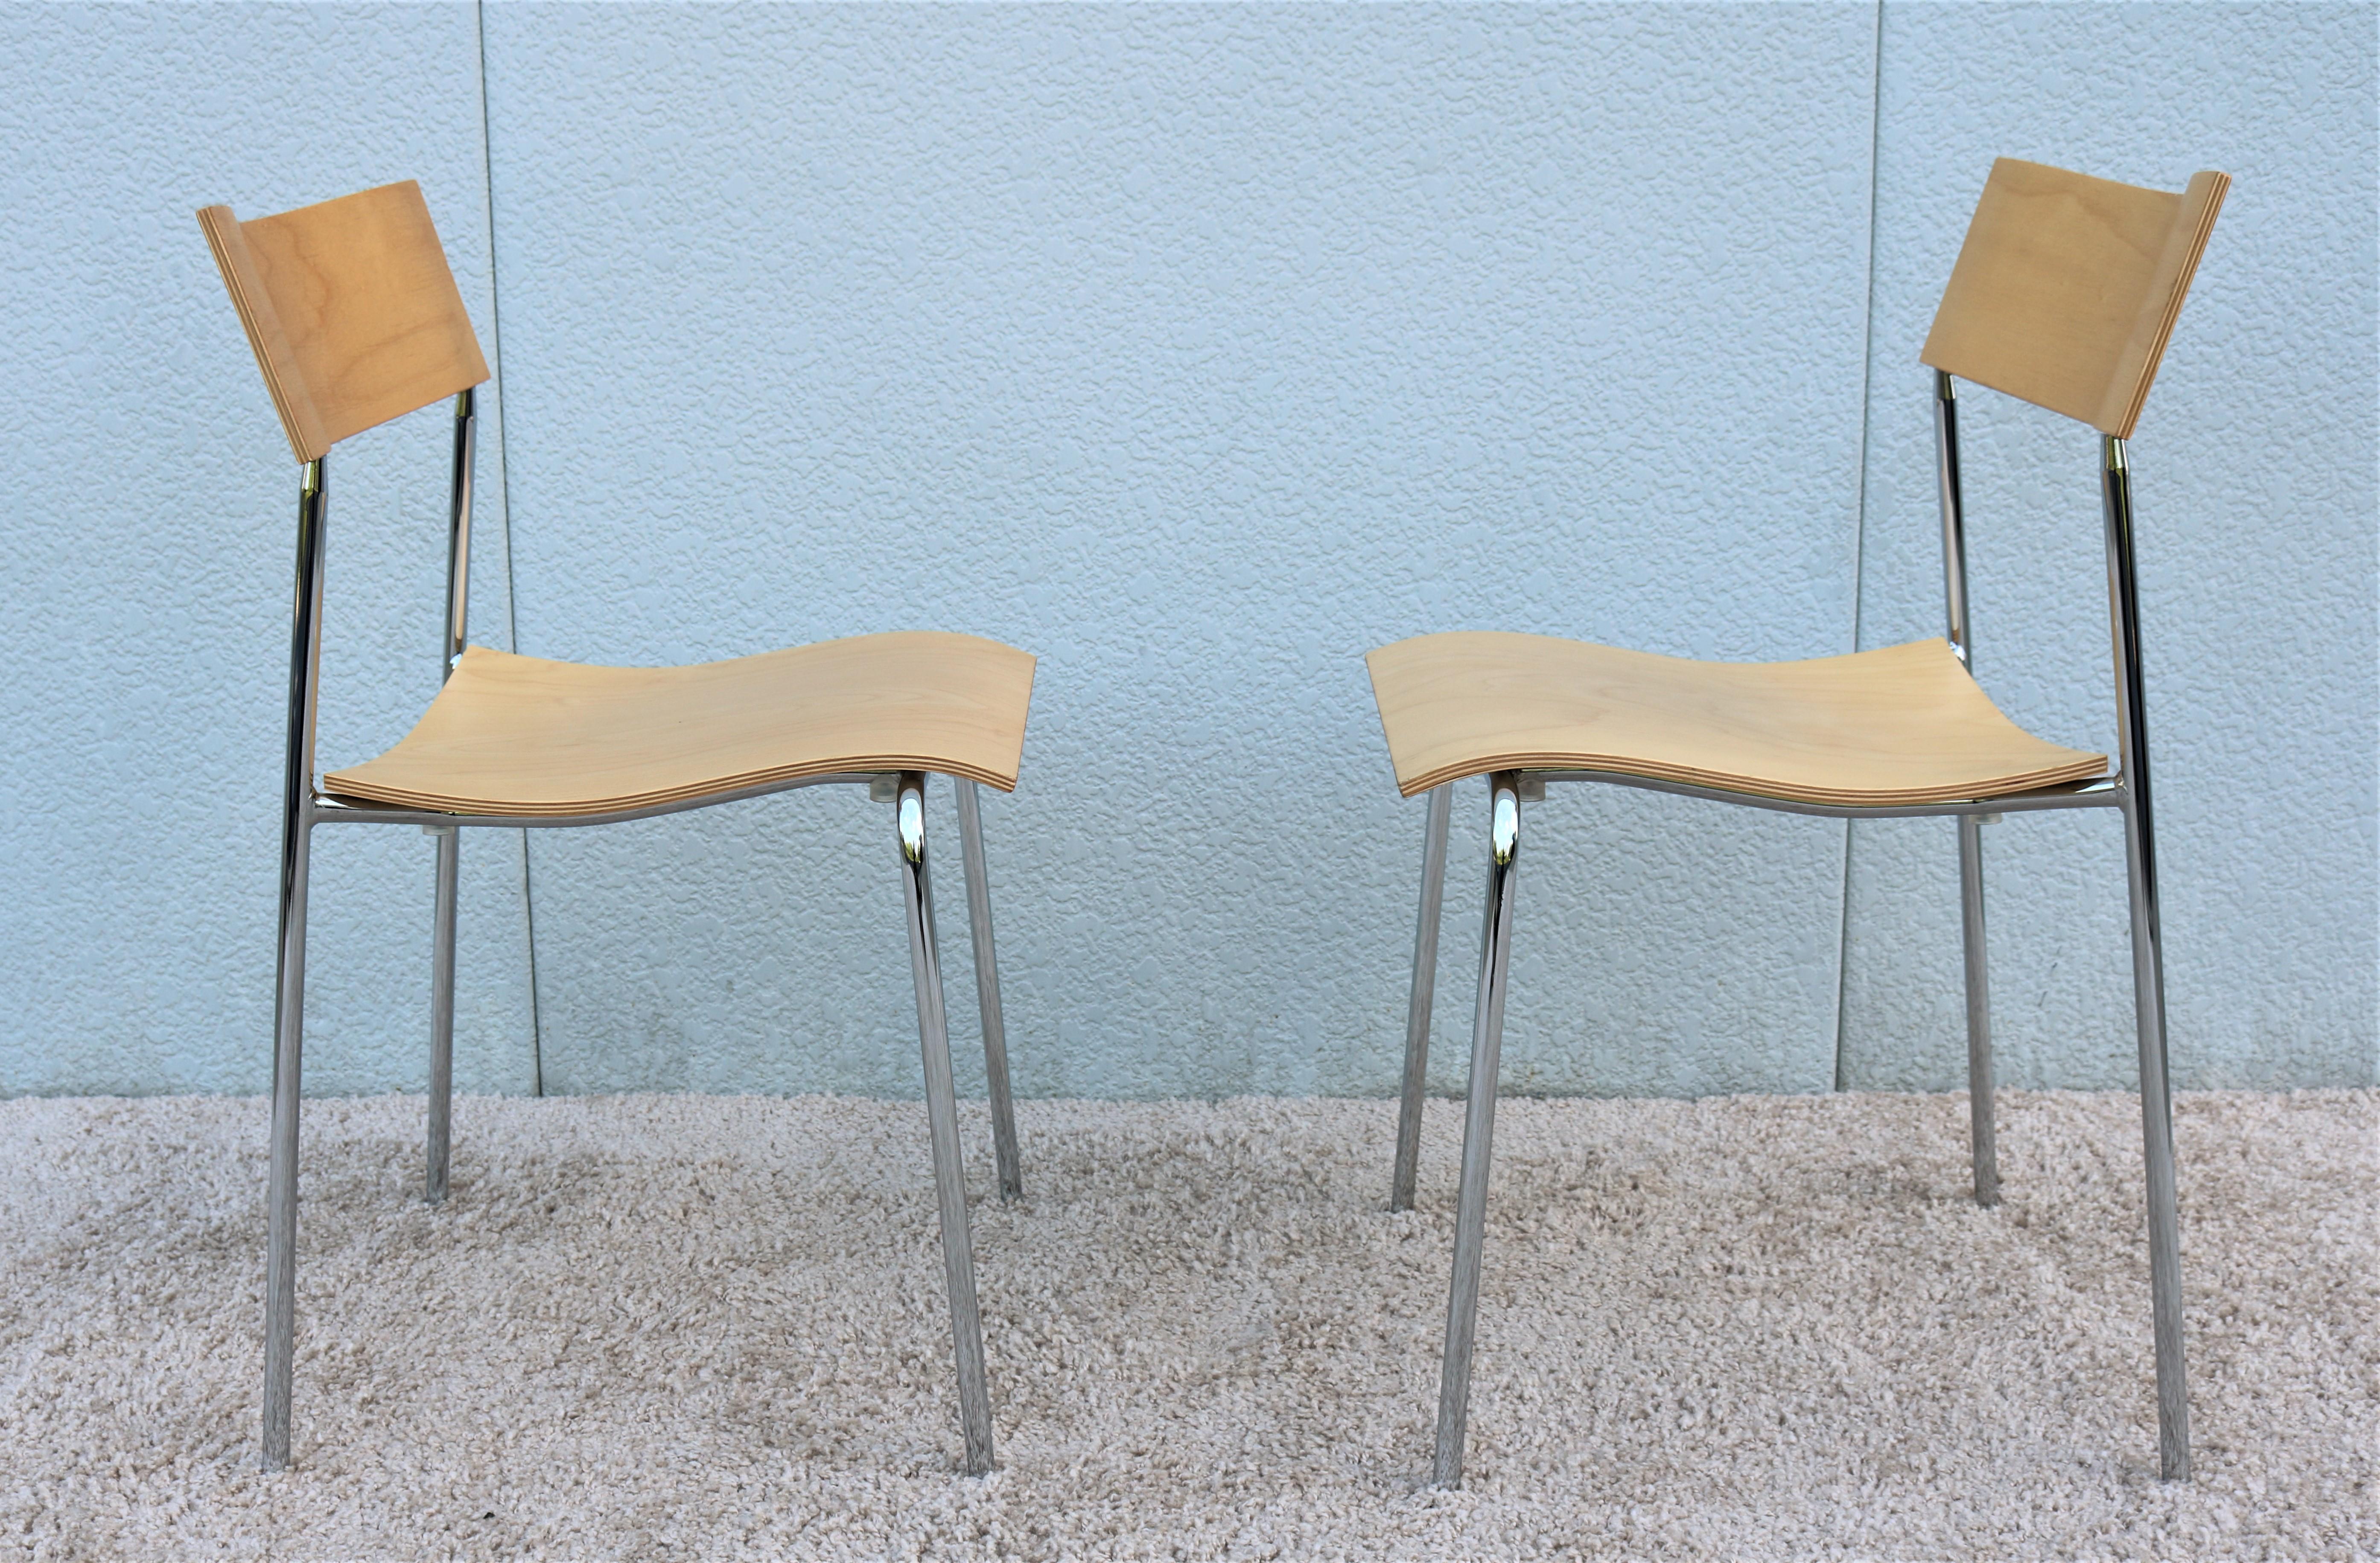 Scandinavian Modern 1992 Sweden Modern Campus AB Chairs by Johannes Foersom for Lammhults, a Pair For Sale